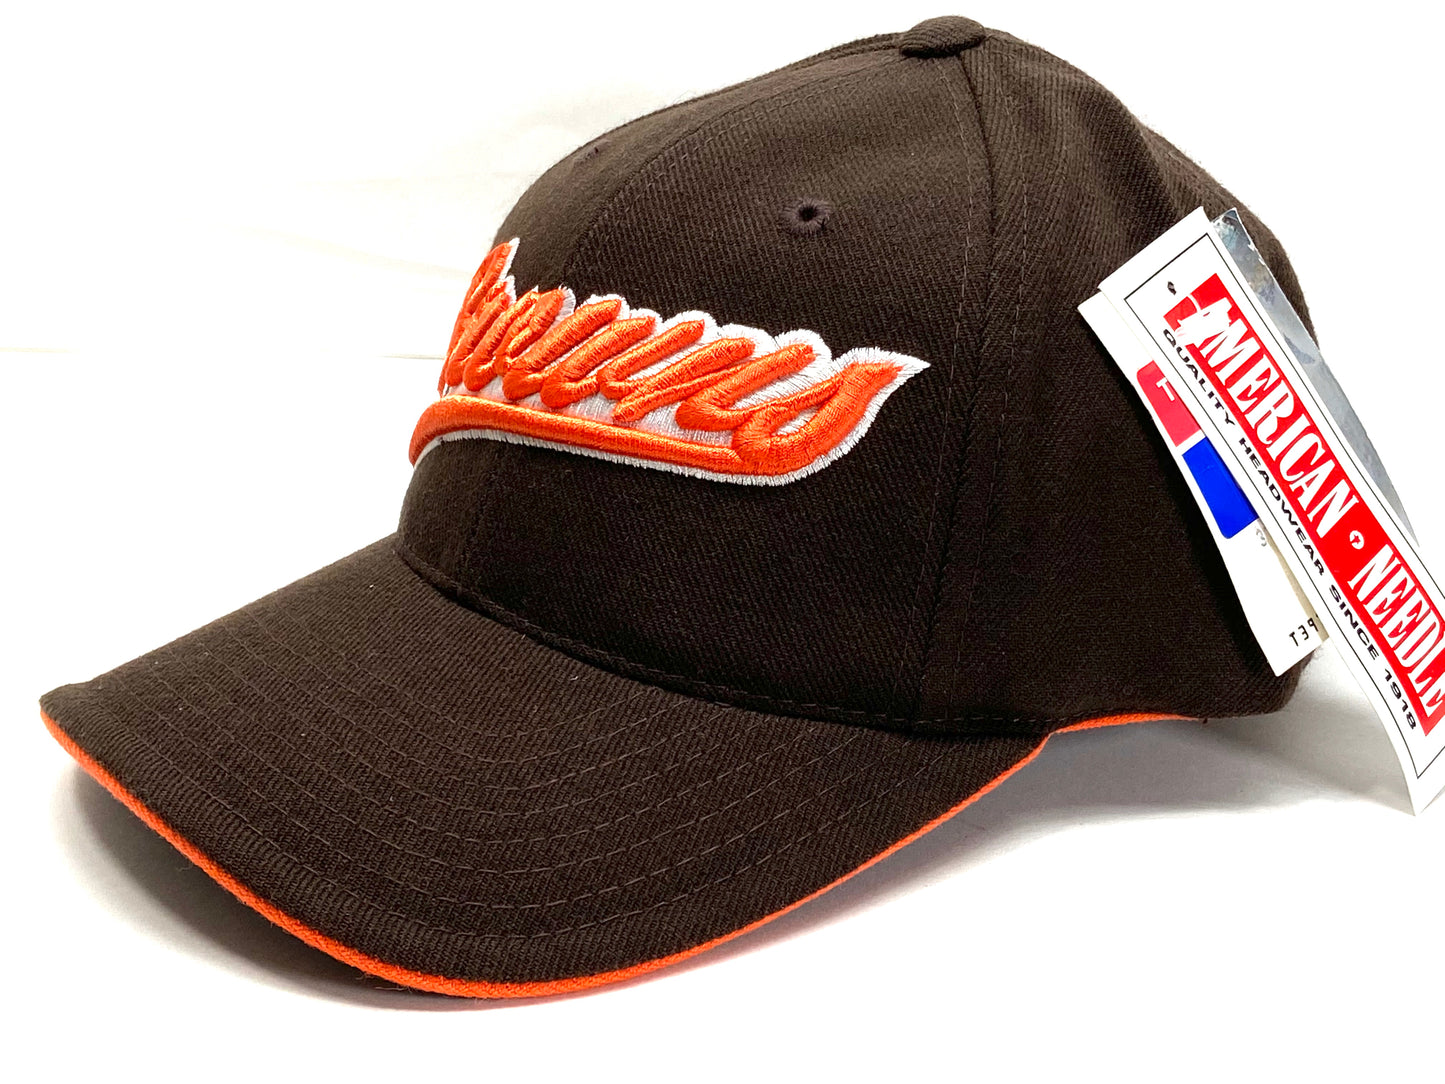 Cleveland Browns Vintage NFL 20% Wool Script 3-D "Browns" Cap By American Needle